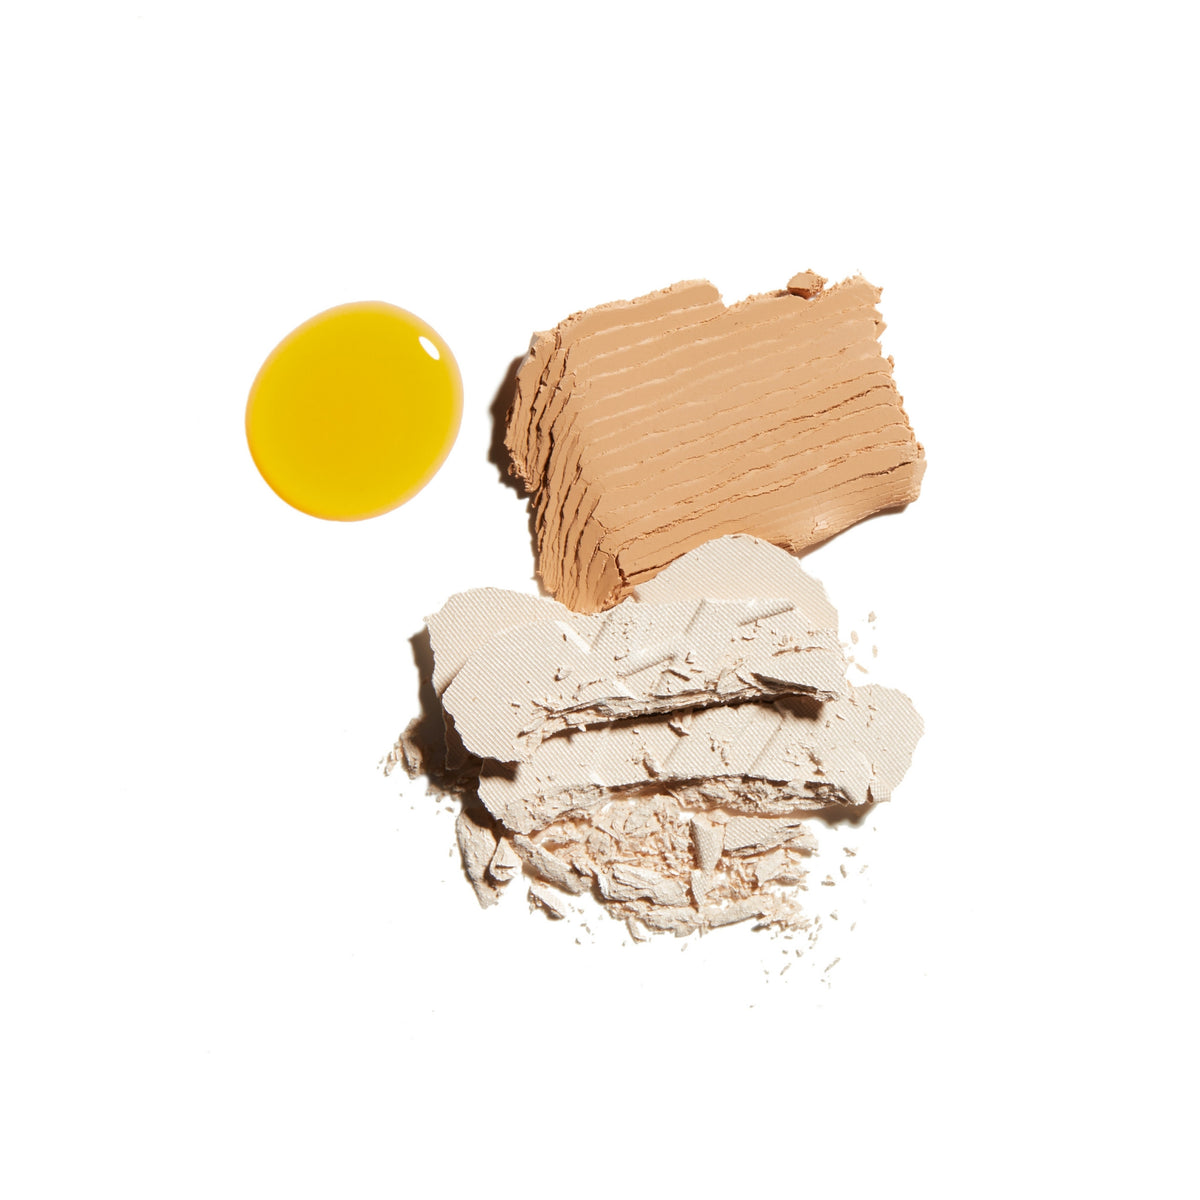 Kjaer Weis Cream Foundation . This product is for medium and deep complexions